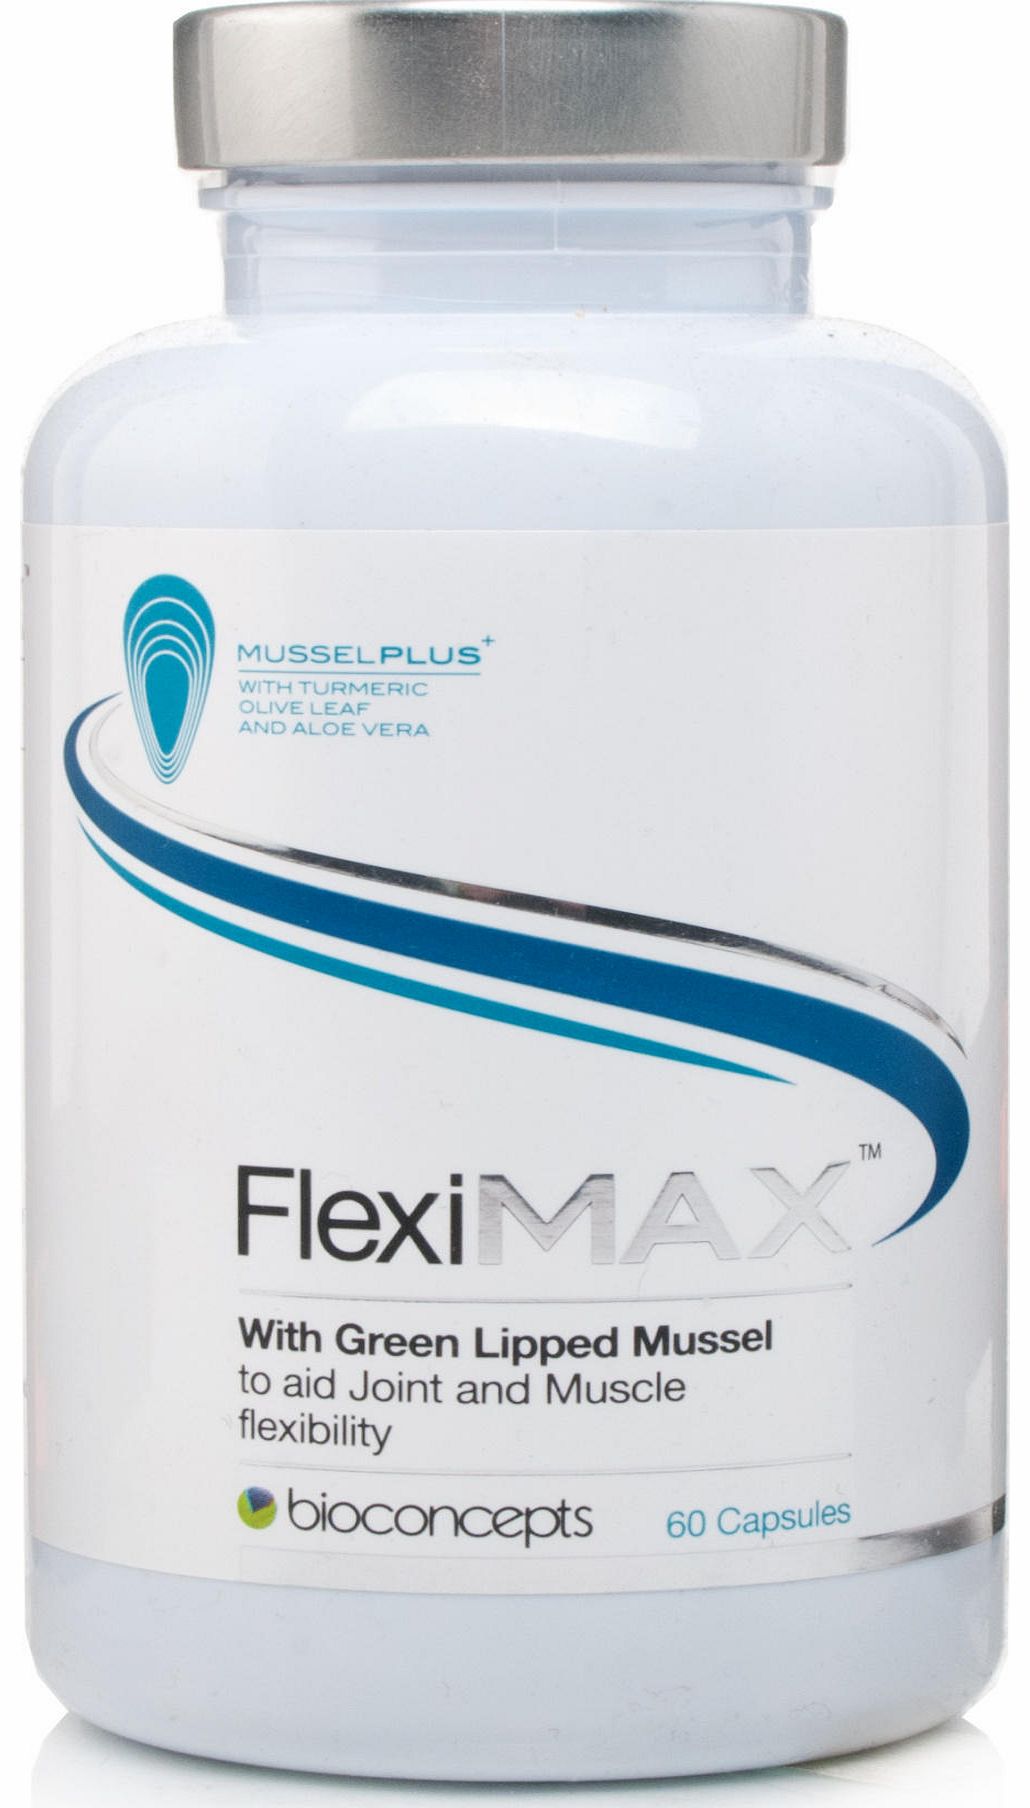 FlexiMAX with Green Lipped Mussel